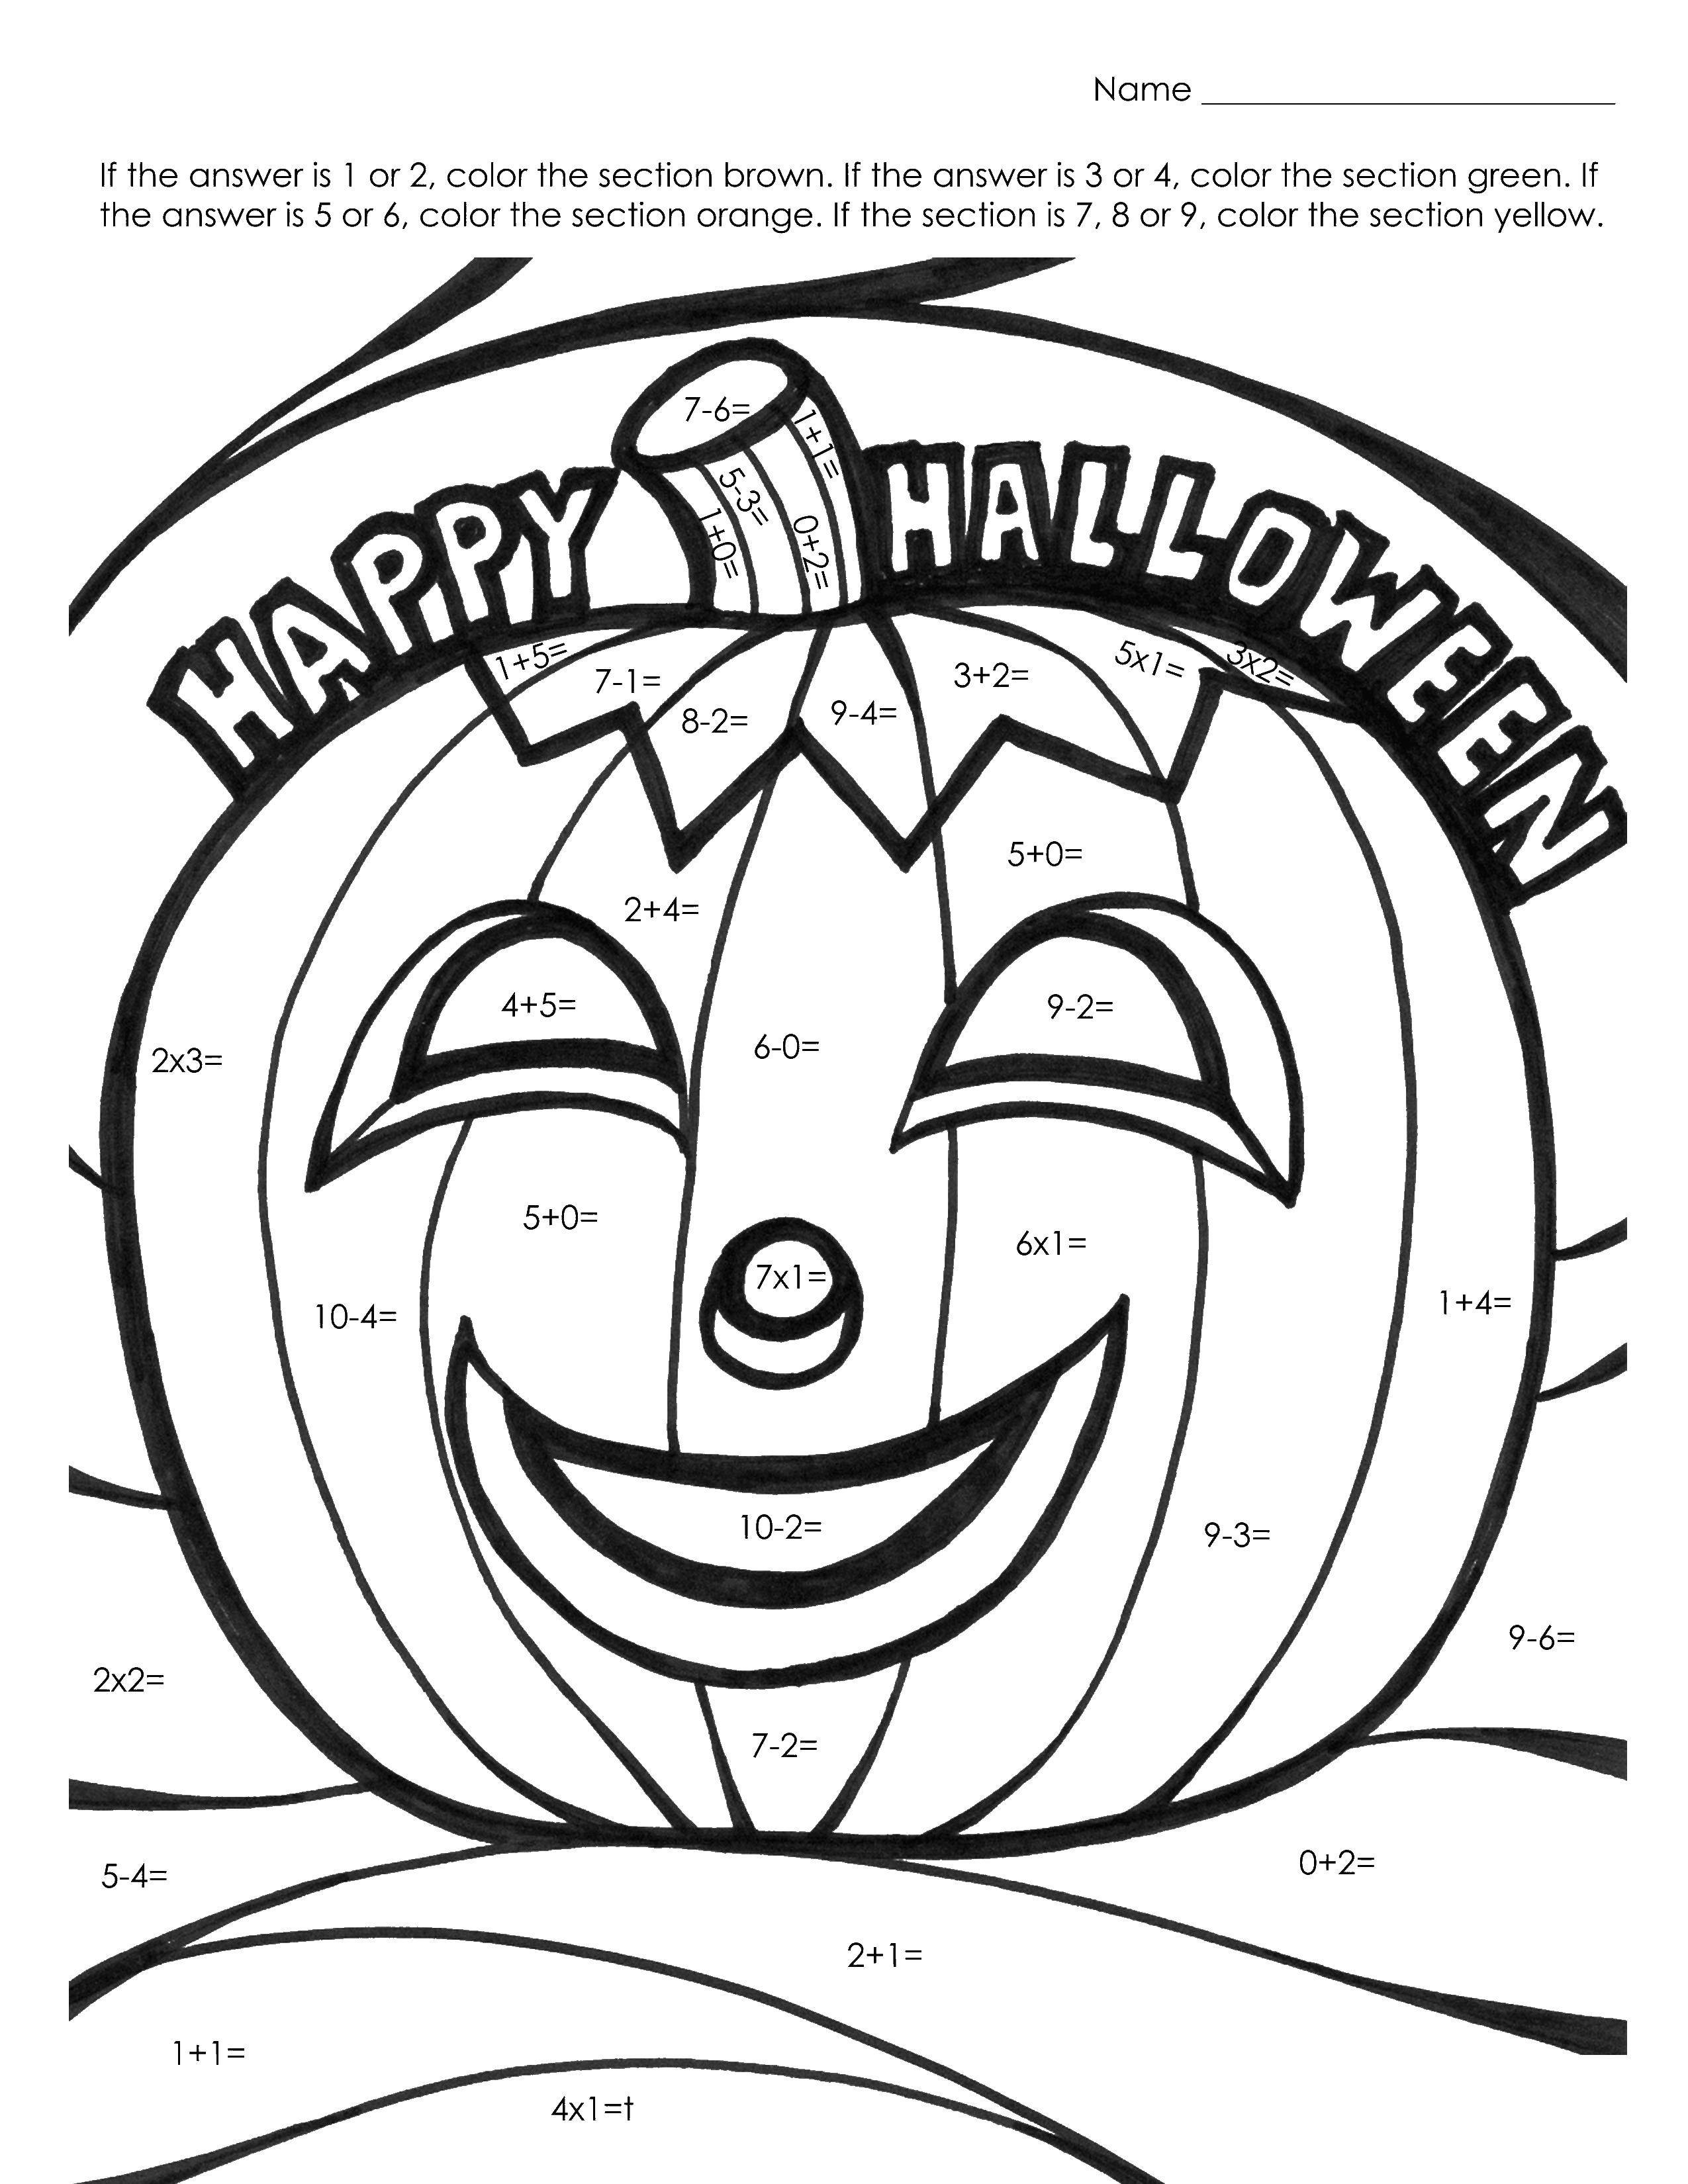 Coloring Congratulation on Halloween. Category greetings. Tags:  greetings, Halloween.